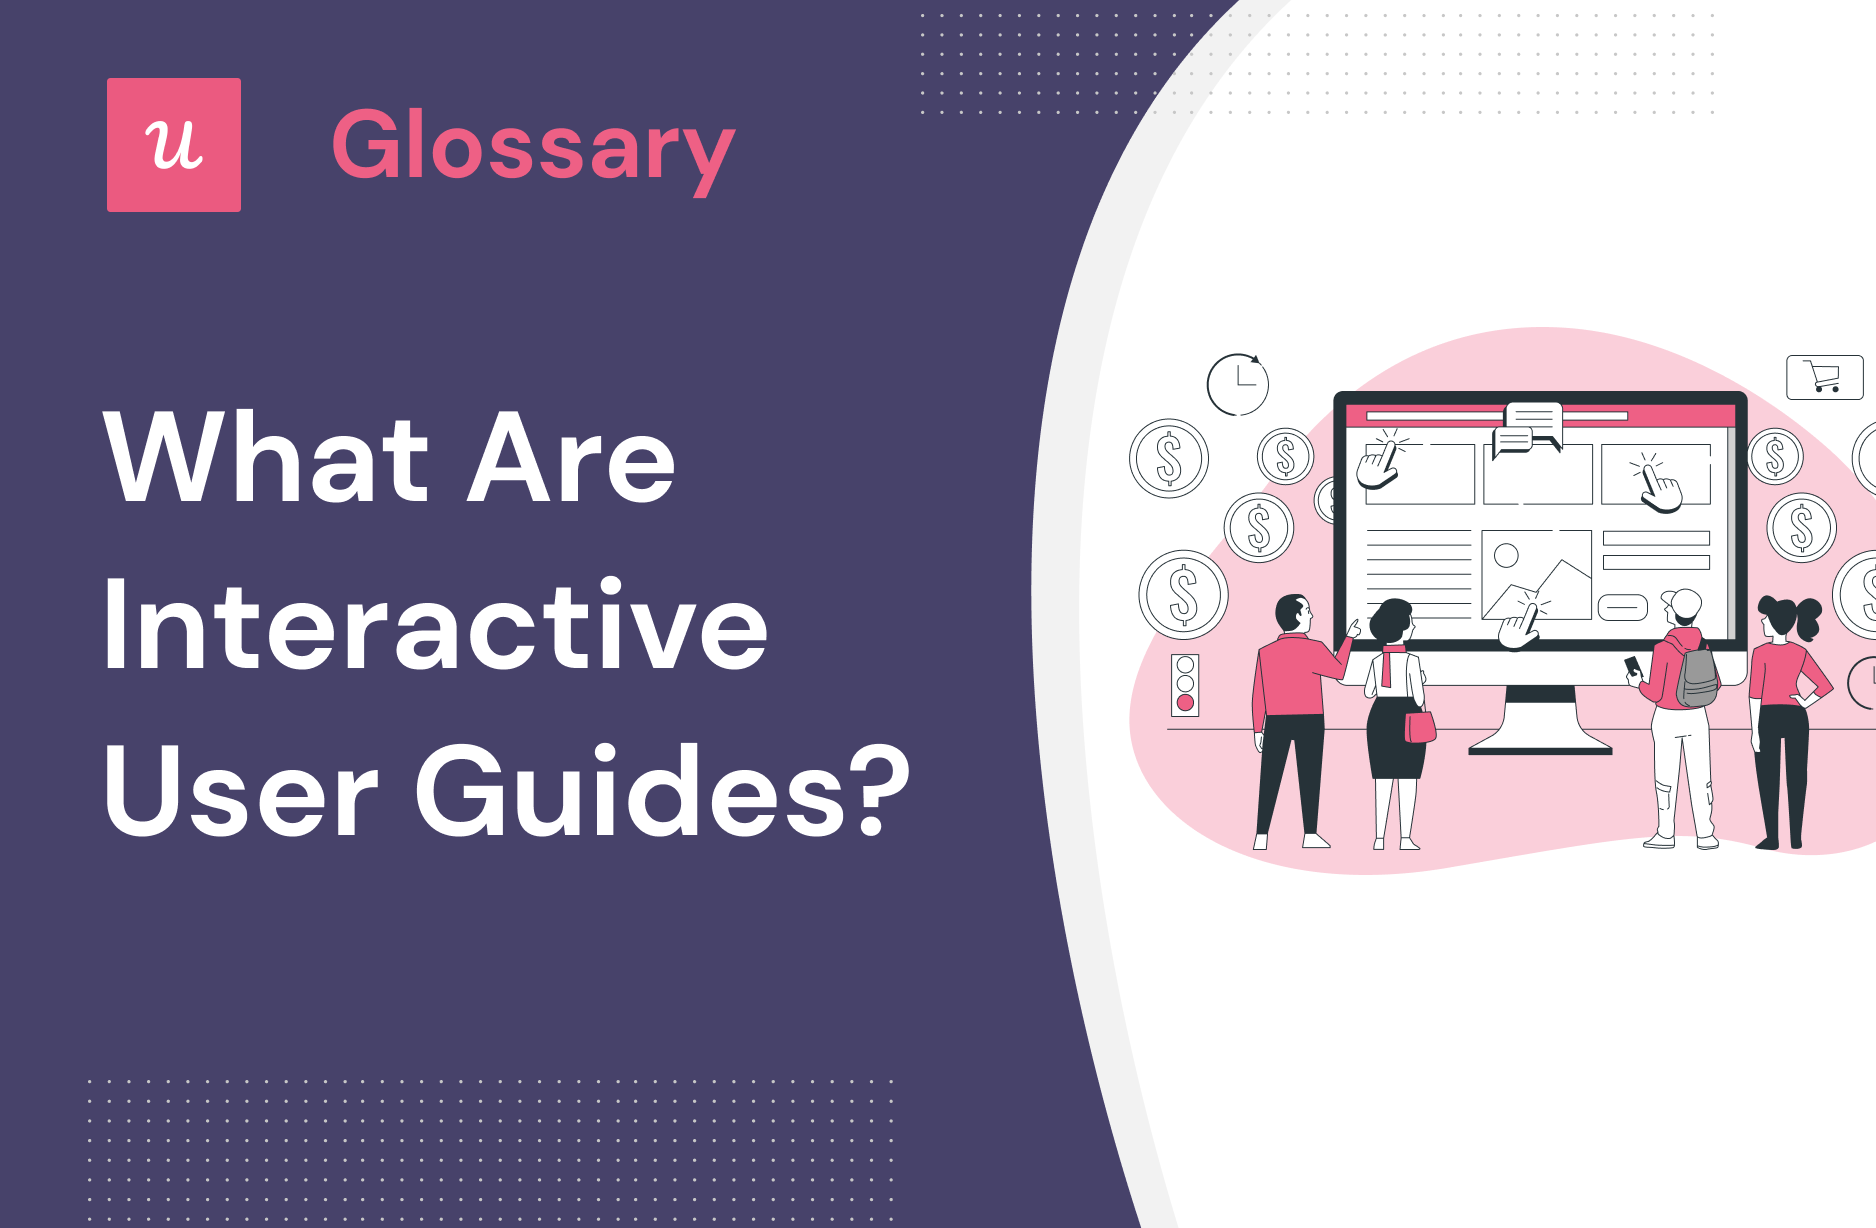 What are Interactive User Guides?